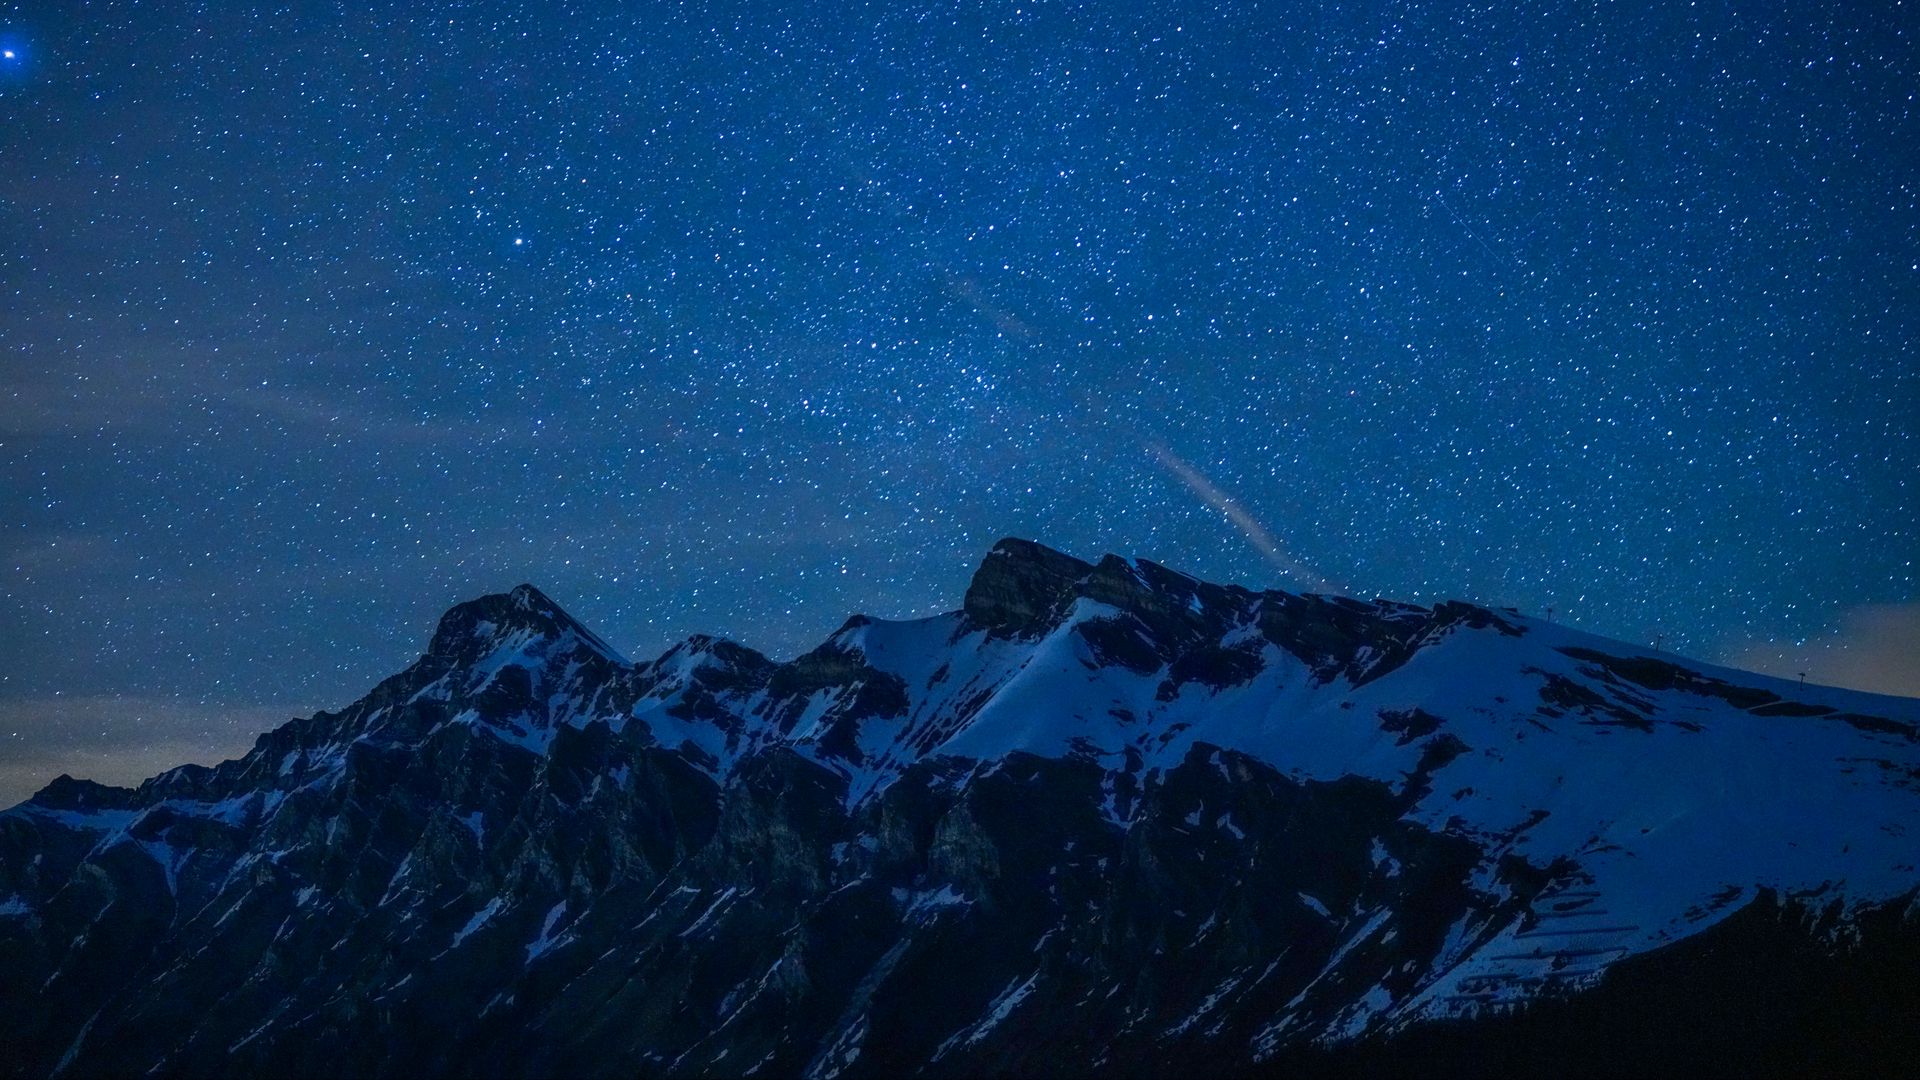 Download wallpaper 1920x1080 mountains, snow, starry sky, night full hd ...